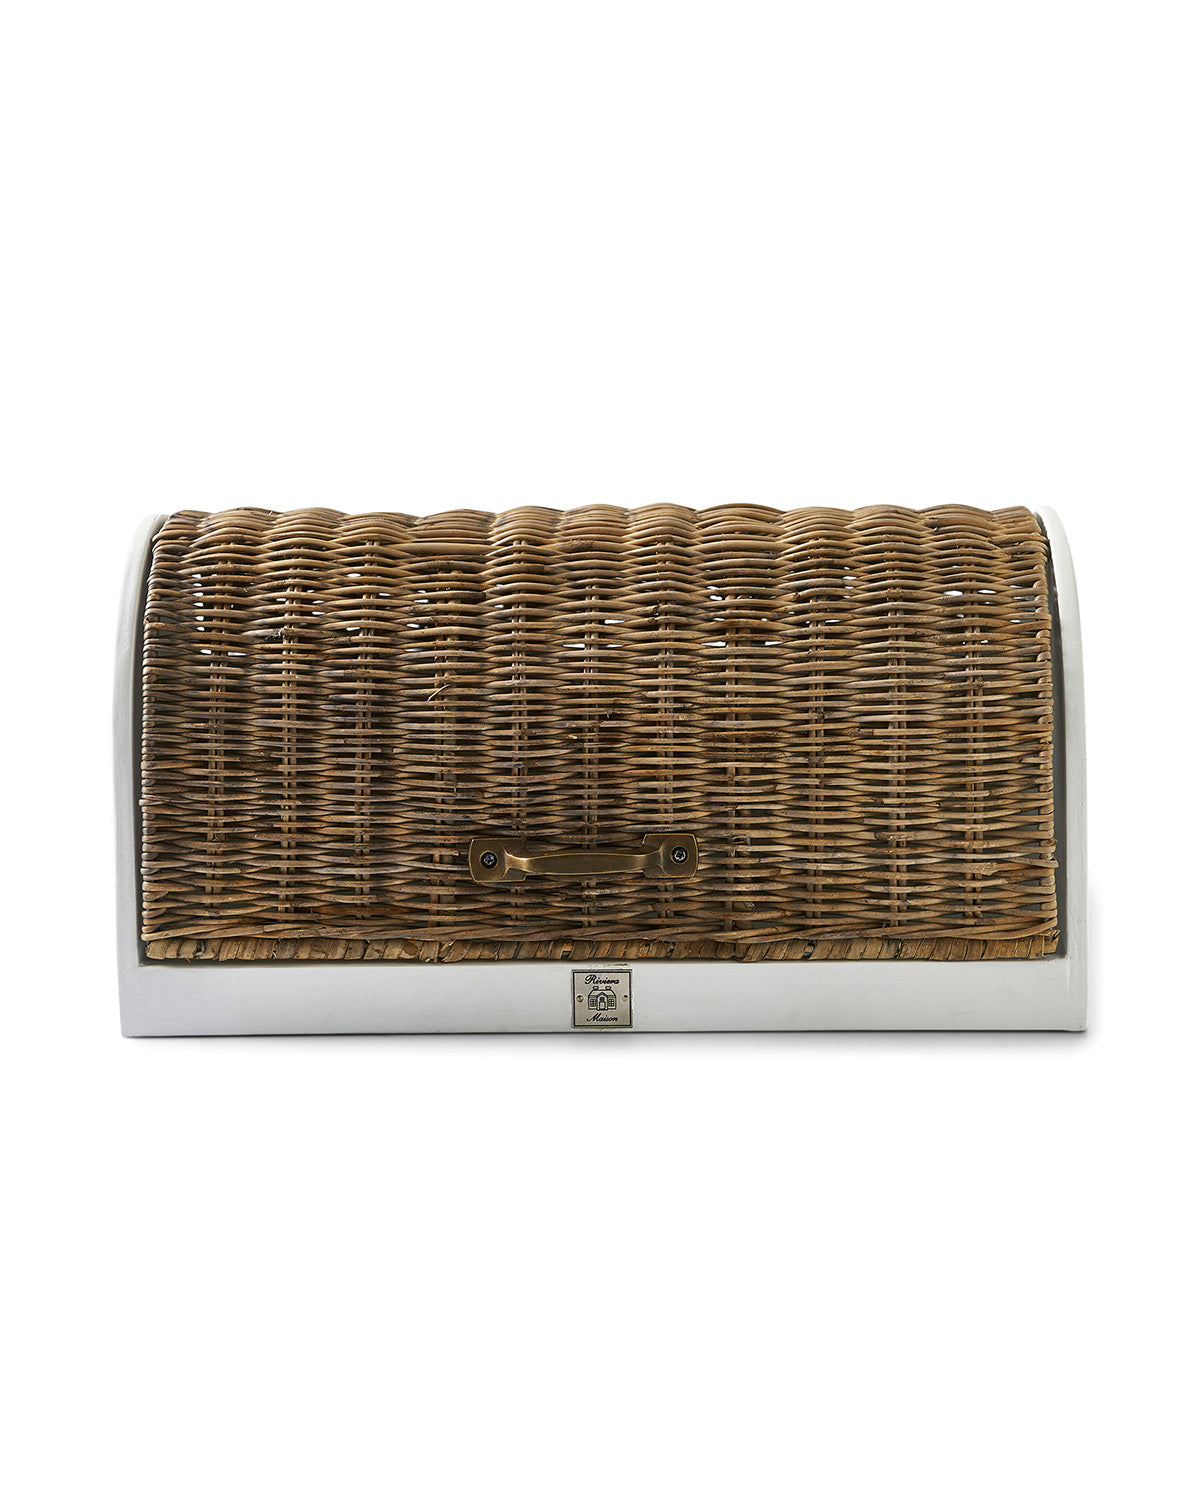 Bread BOX made from Rattan an white painted wood by Riviera Maison